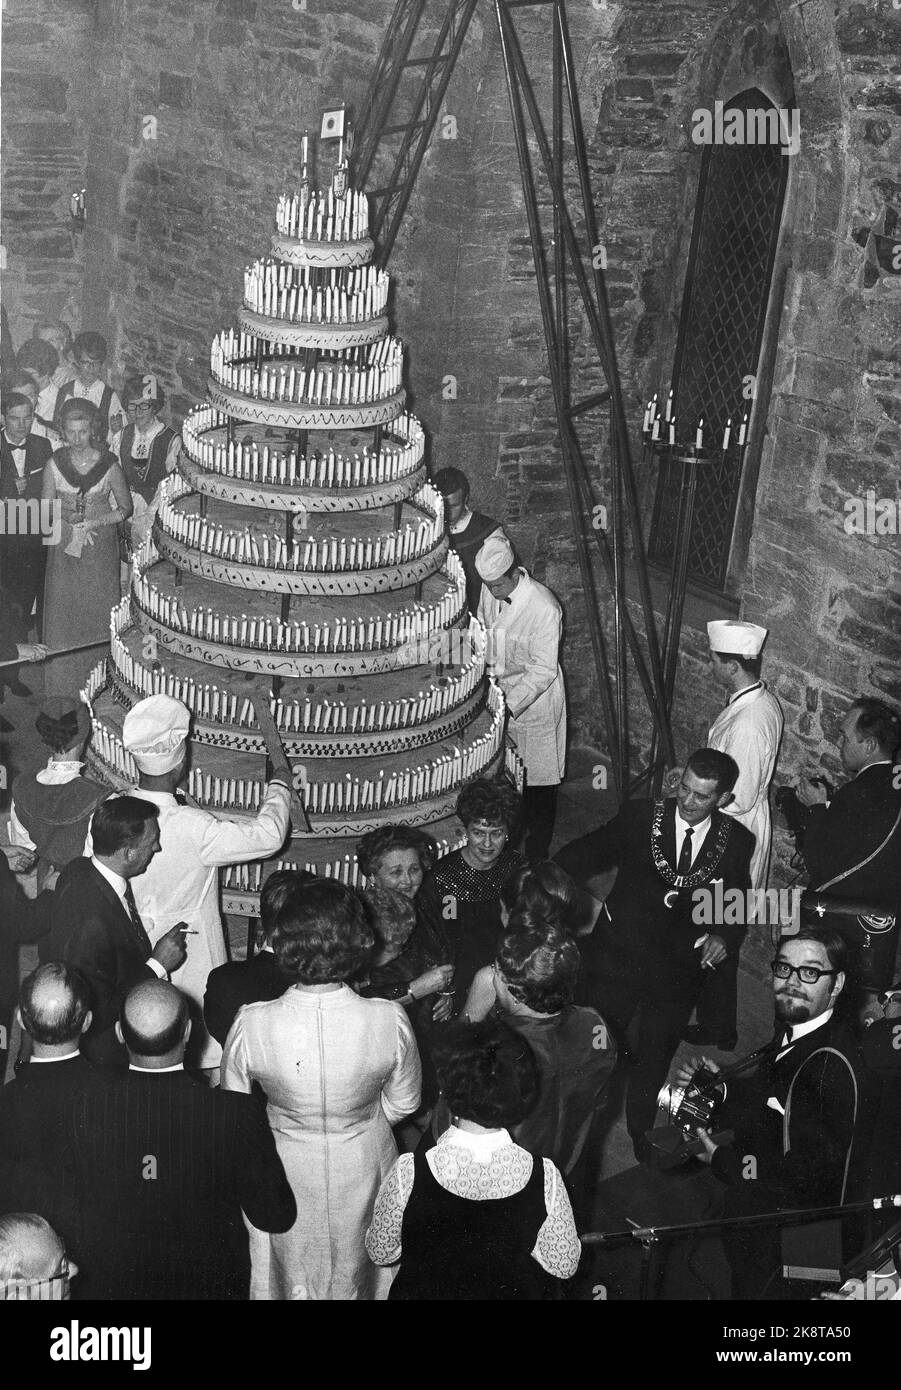 Bergen 19700101 just over midnight New Year's night started Bergen's 900th anniversary. At the municipality's reception in Håkonshallen, a cake with 900 lights was served, made by pastry master Kjell Berentsen. Photo: NTB Stock Photo